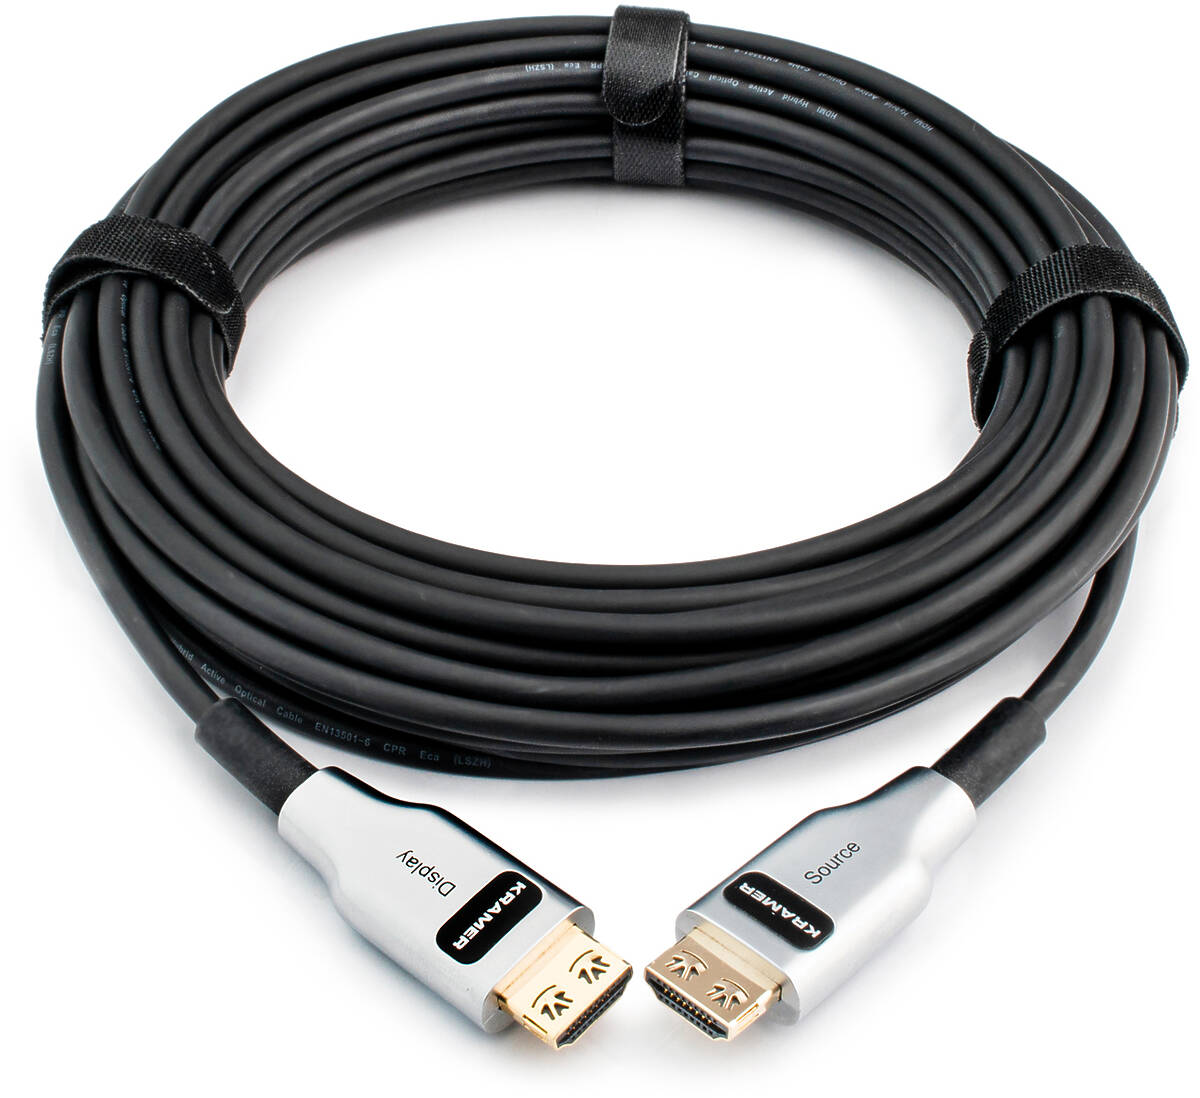 CLS-AOCH/60F-164 50.00m Kramer CLS-AOCH/60F cable product image. Click to enlarge.